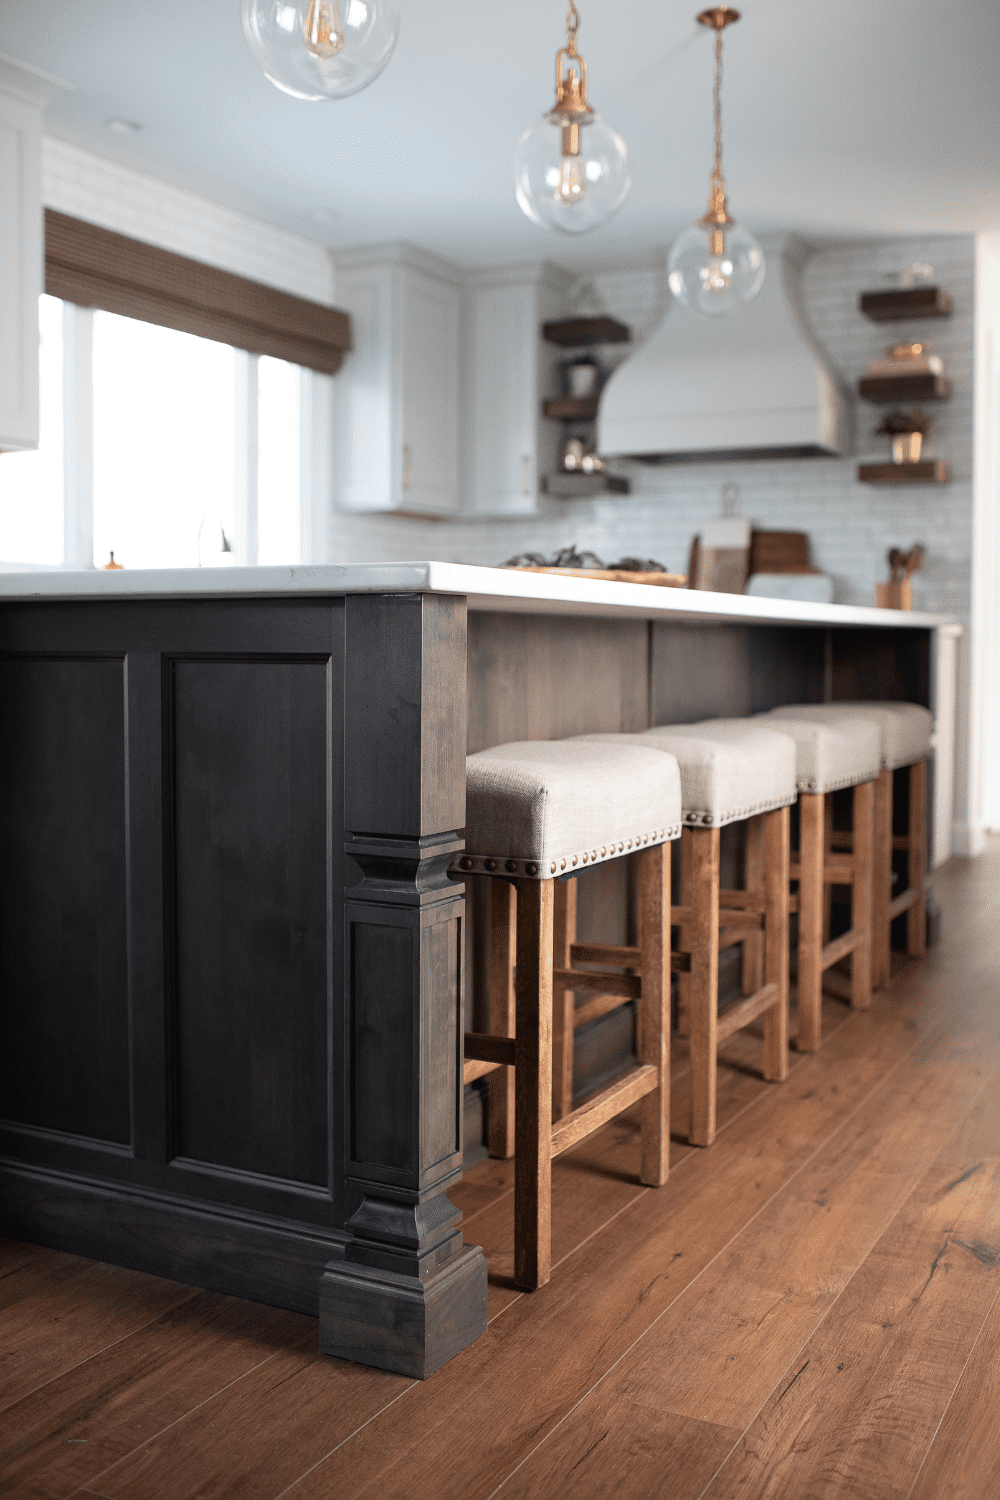 Nicholas Design Build | A kitchen with a black island, wooden stools, and neutral accents.